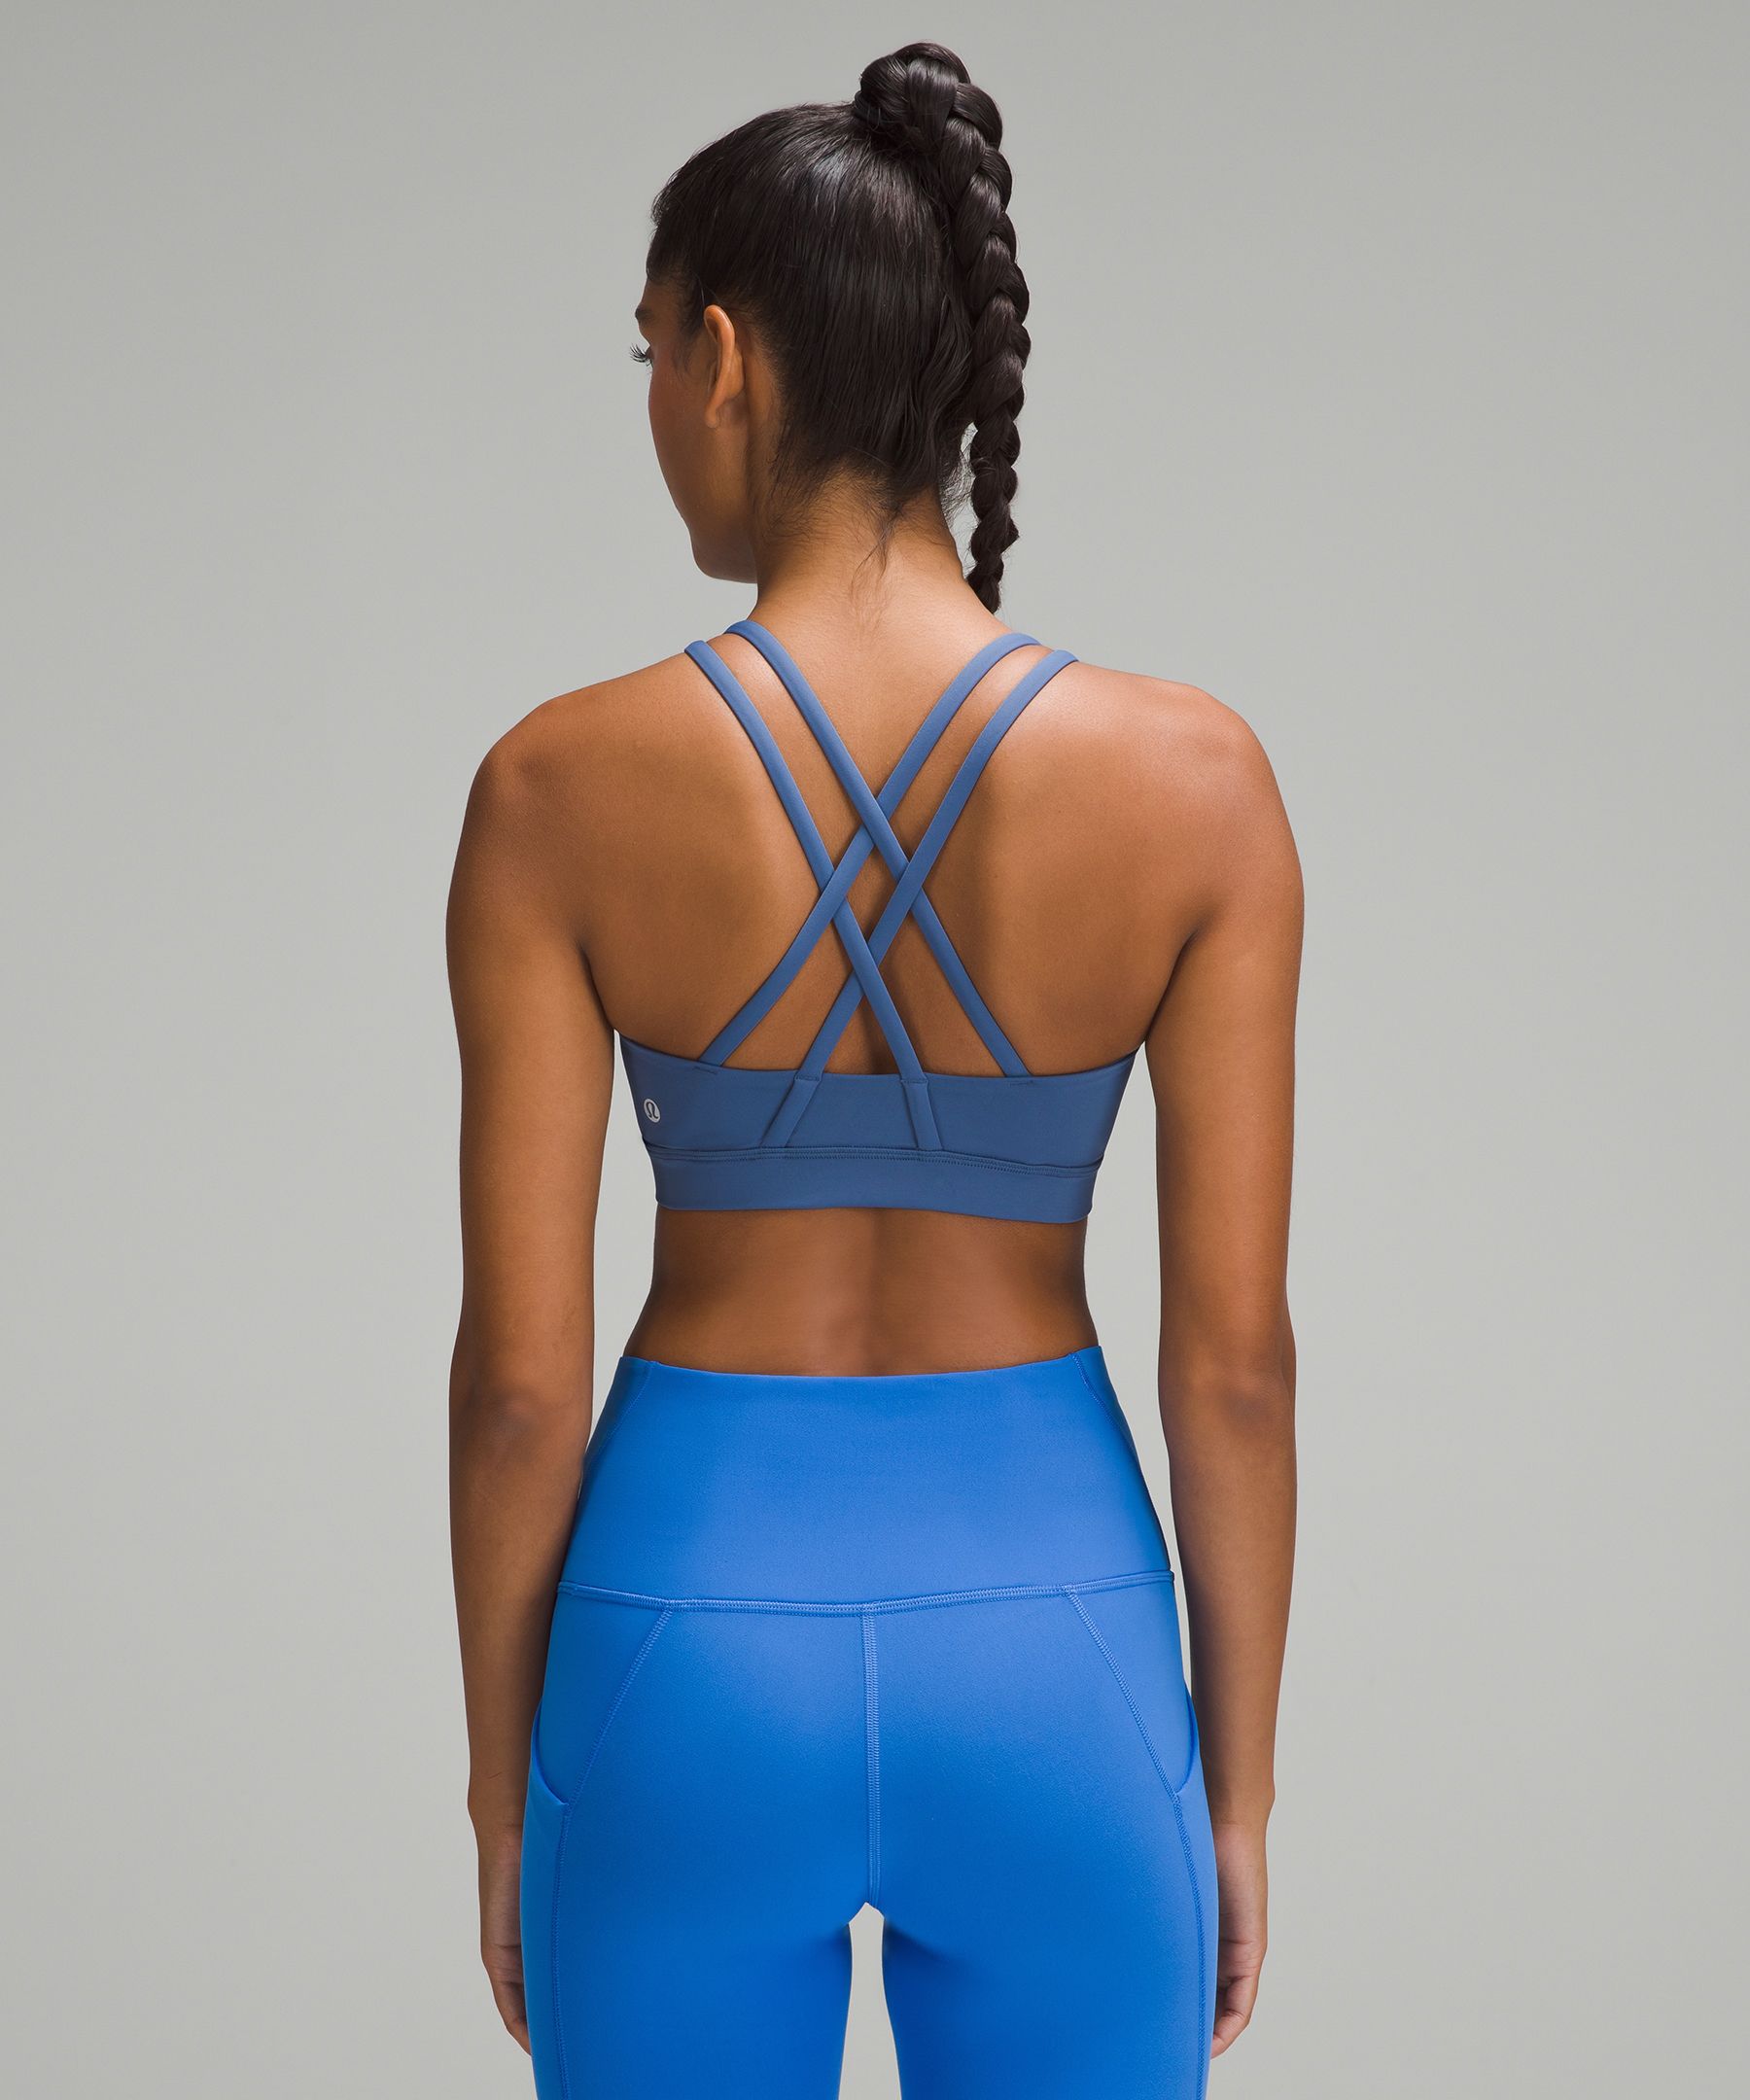 Introducing our Metallic Blue Sports Bra and Staple. This set is